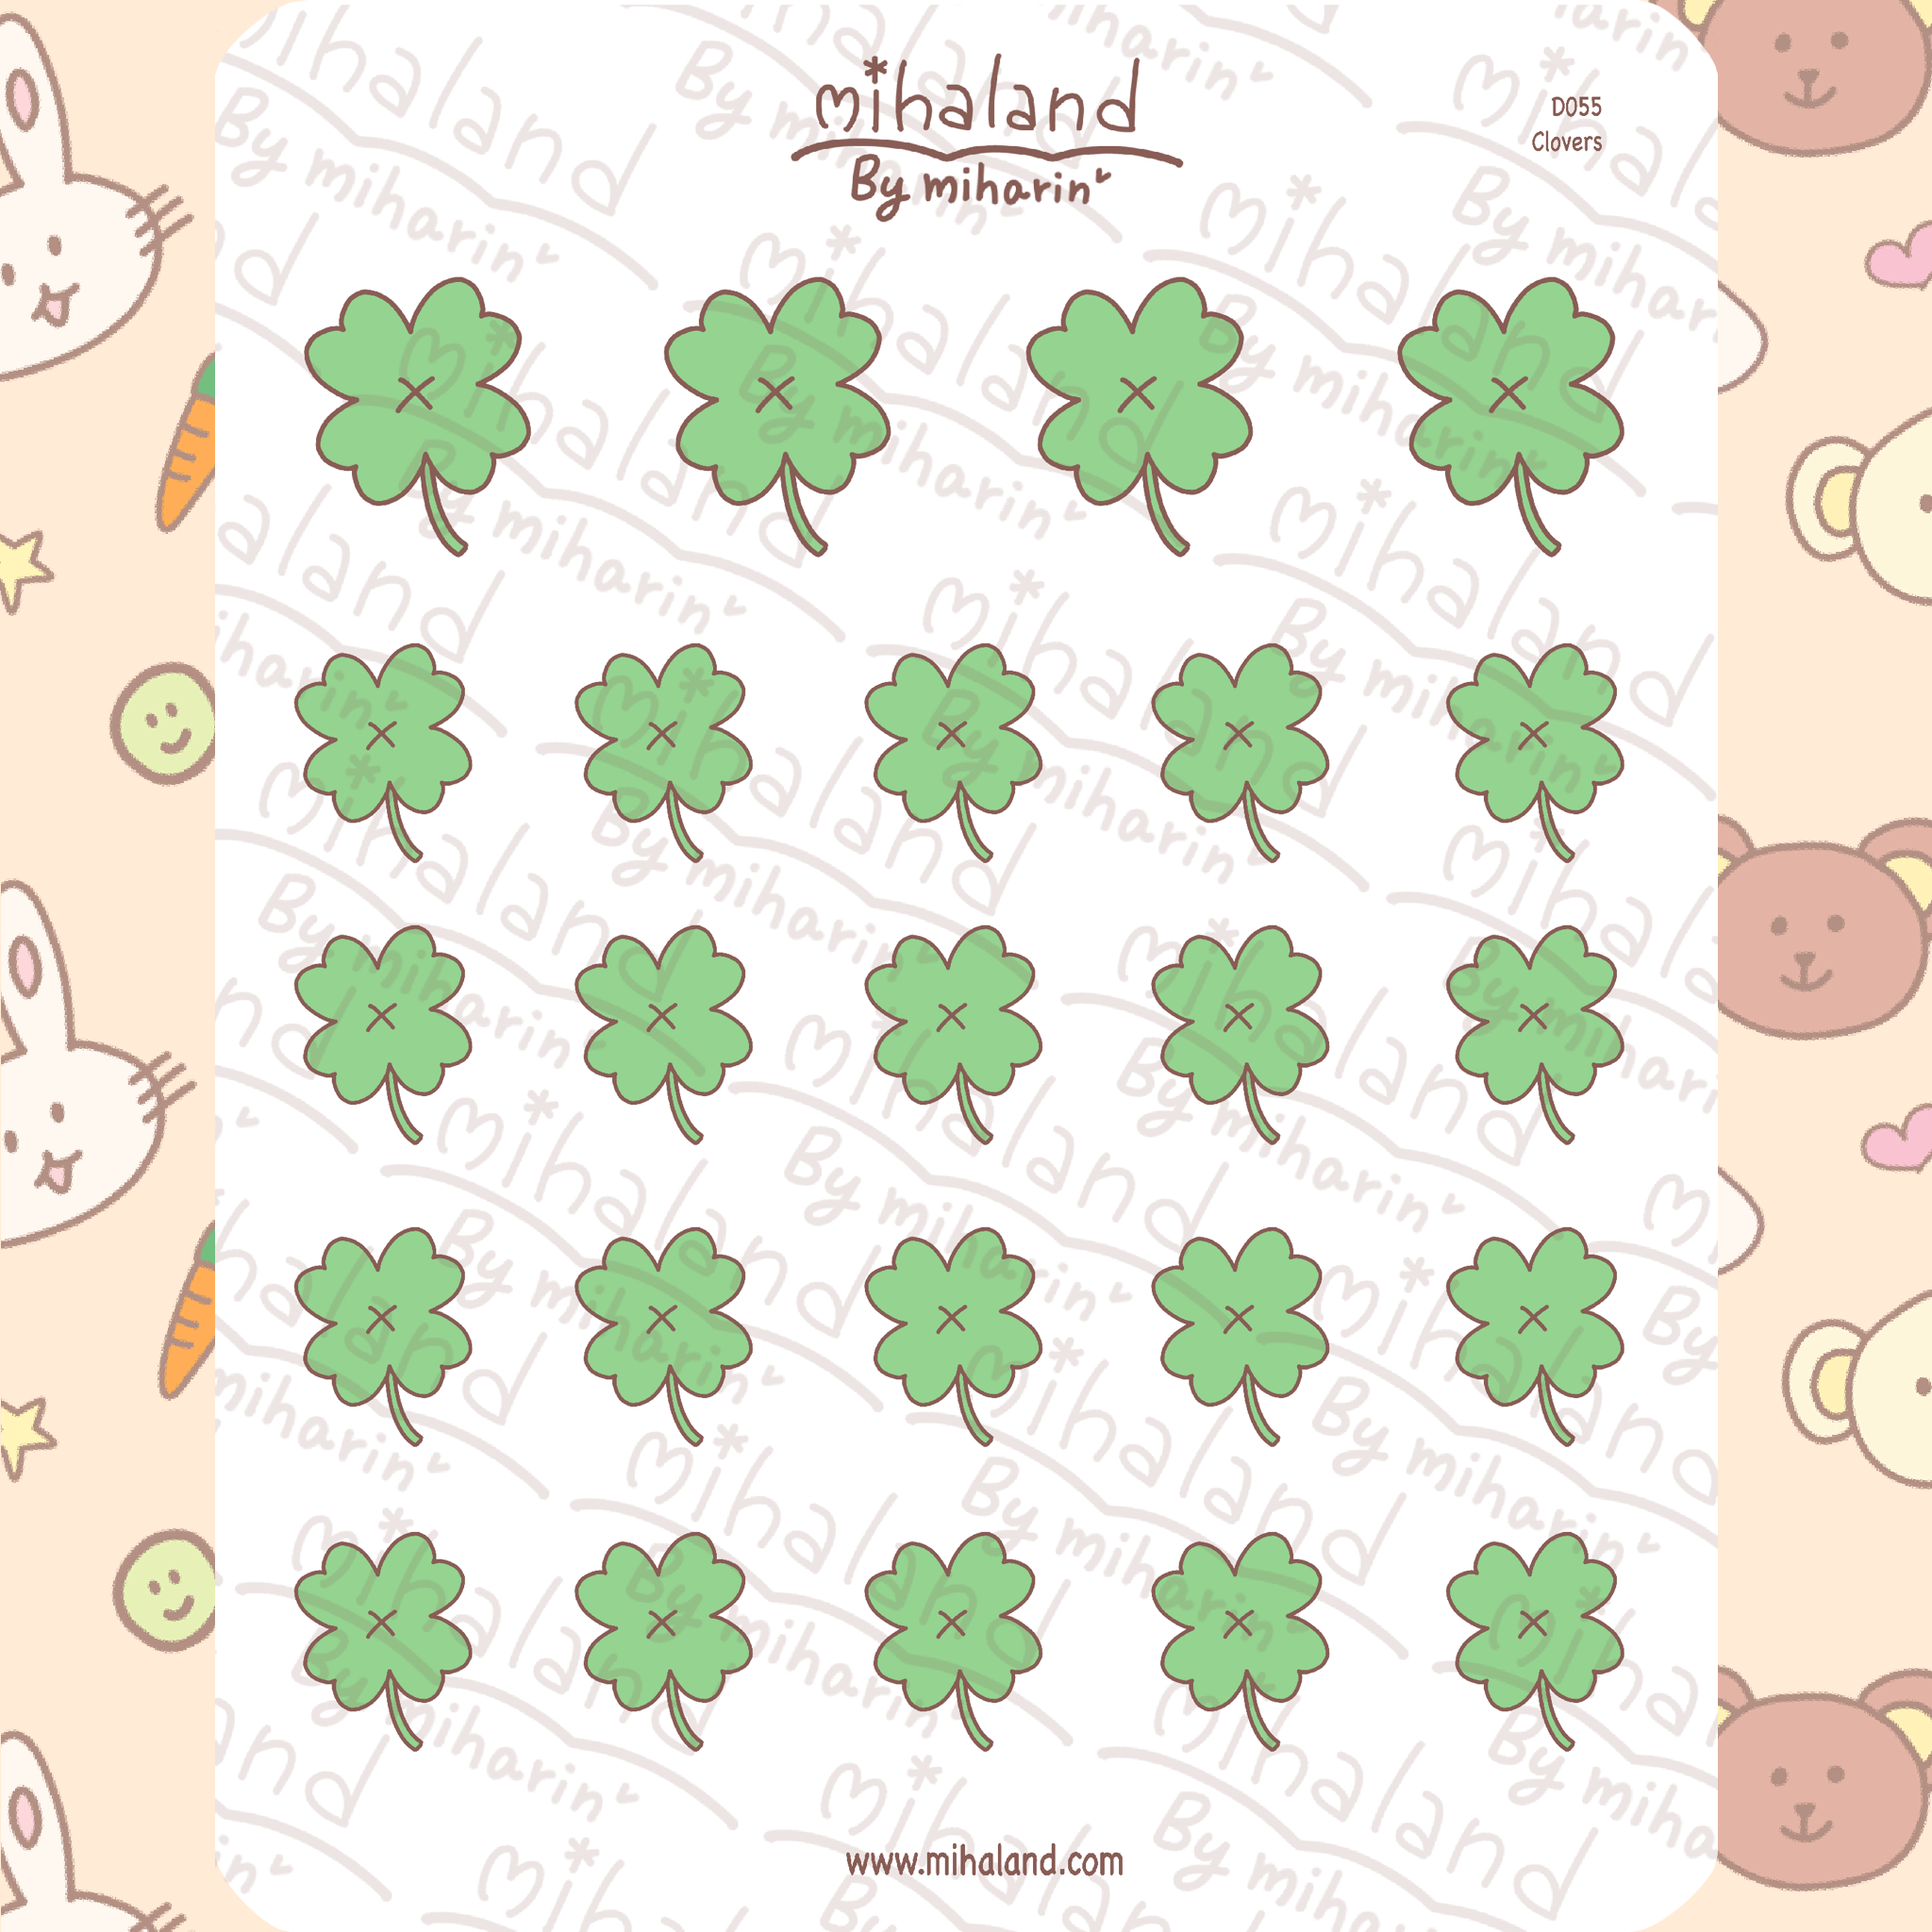 Clovers Planner Stickers (D055) - mihaland